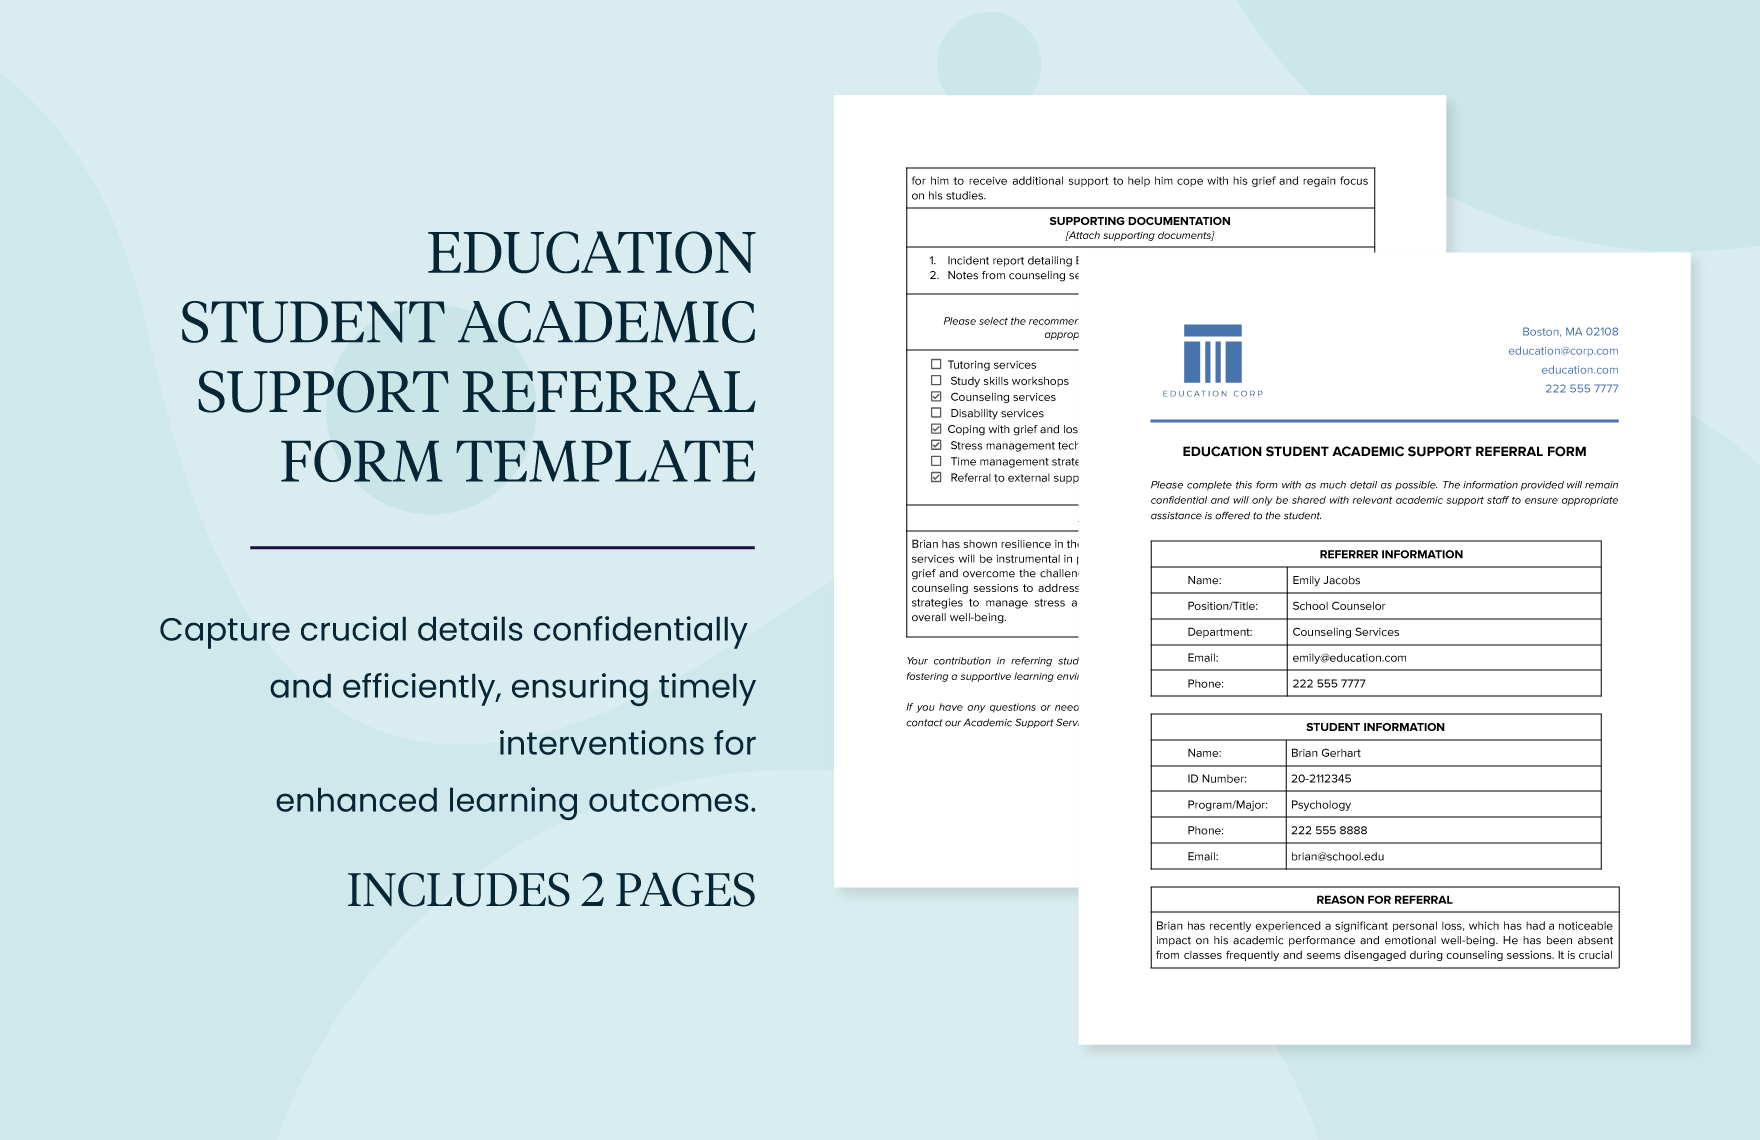 Education Student Academic Support Referral Form Template